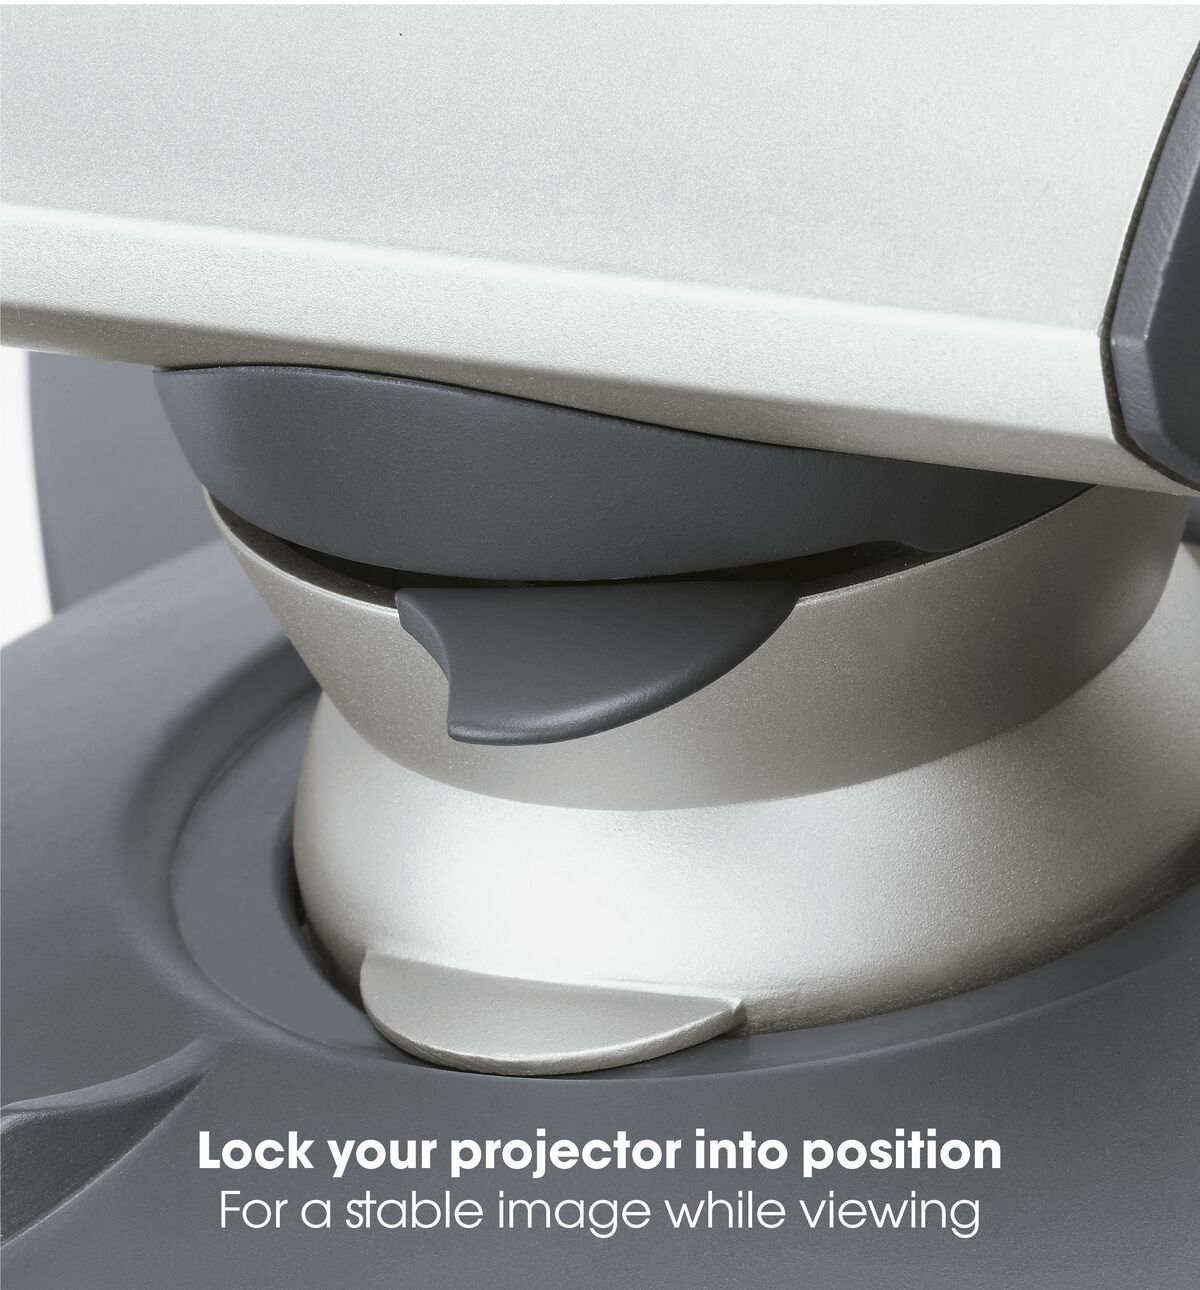 Vogel's EPC 6545 Projector Ceiling Mount - Charge maximale : USP